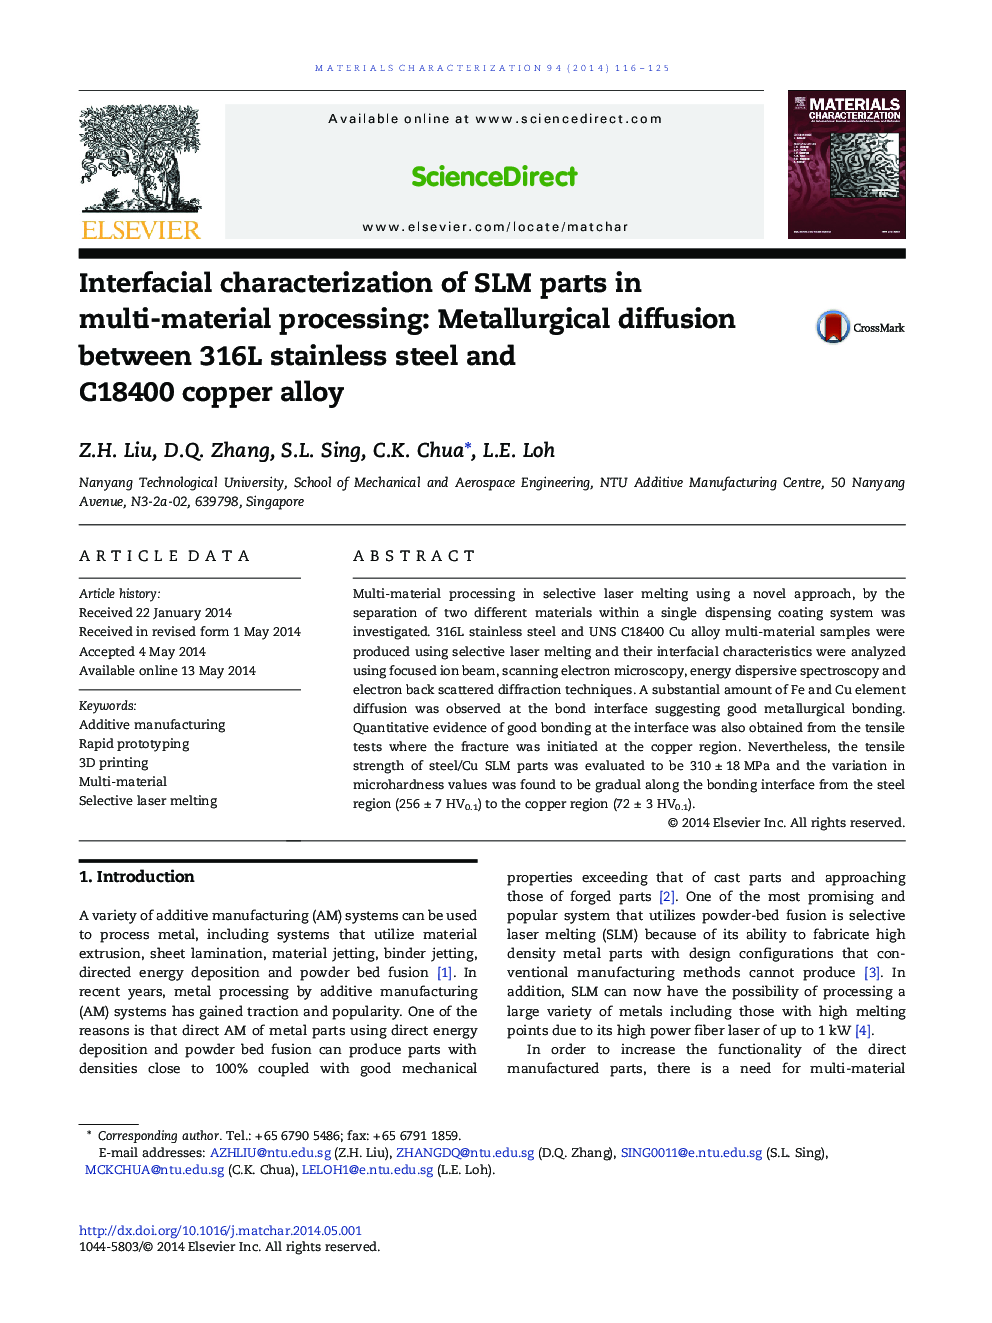 Interfacial characterization of SLM parts in multi-material processing: Metallurgical diffusion between 316L stainless steel and C18400 copper alloy